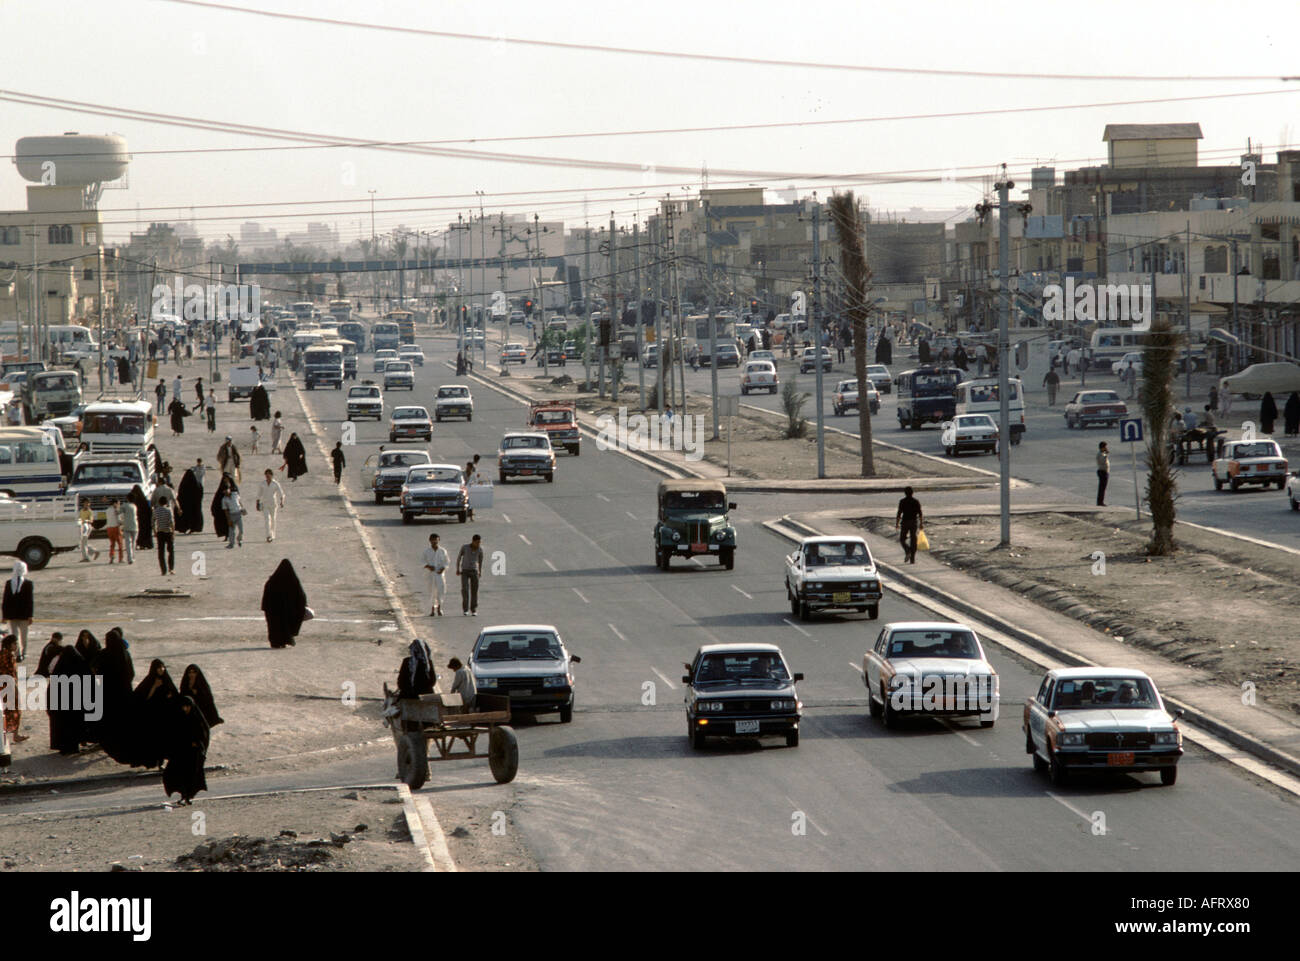 Iraq 1980s, Saddam City Baghdad.  English British Leyland buses traffic people going about their daily lives.  1984 HOMER SYKES Stock Photo